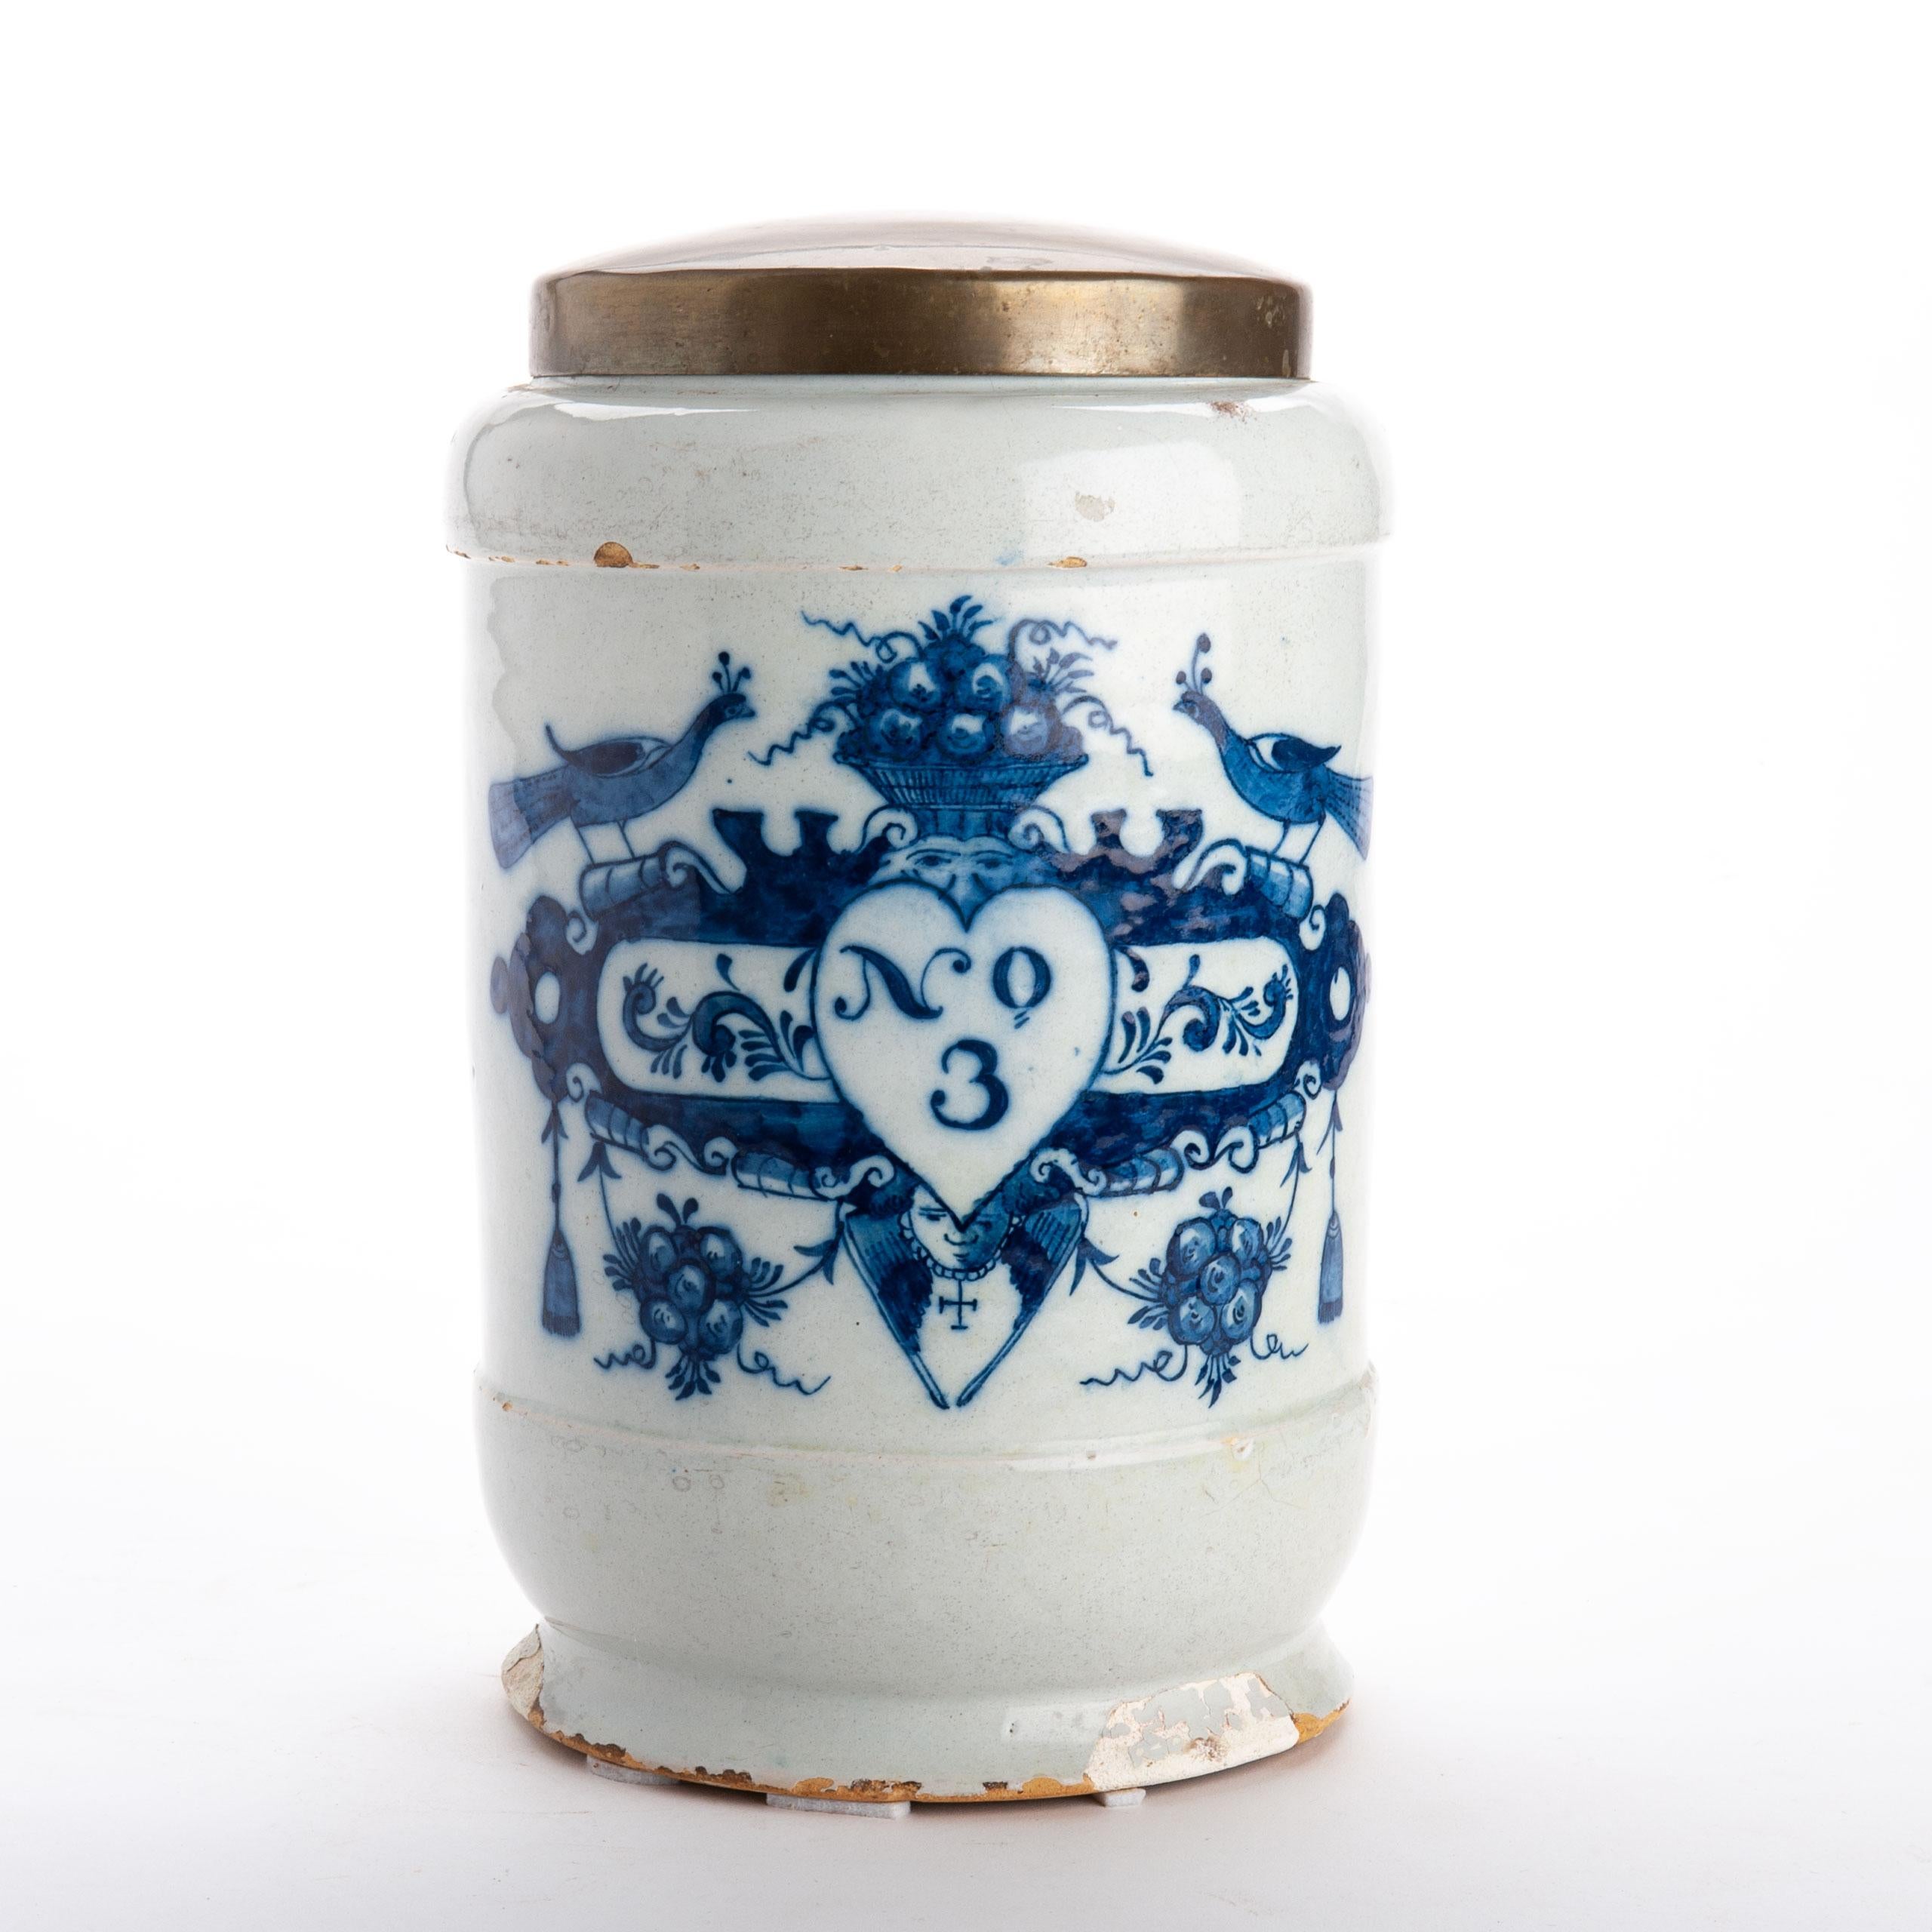 Delft Drug Jar with Cover.
'No 3' inside heart design.
One jar included - number 8 is available separately on request.
Holland, circa 1800.